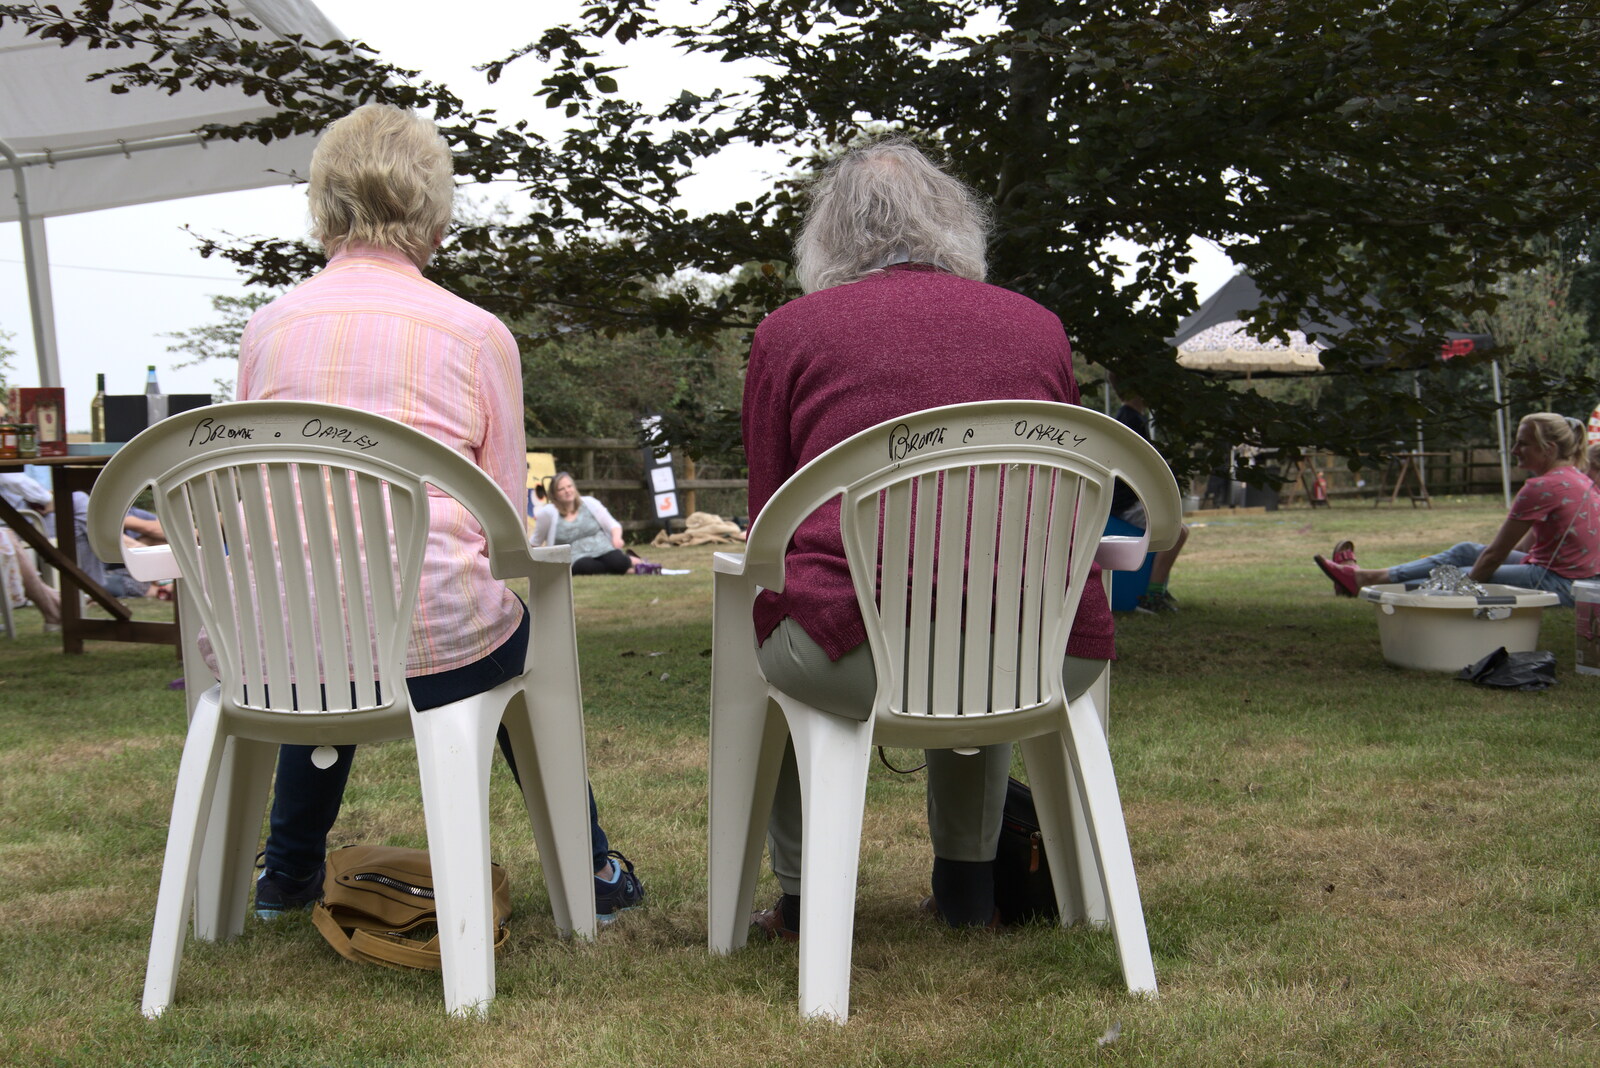 Brome and Oakley chairs from The Brome and Oakley Fête, Oakley Hall, Suffolk - 19th September 2021